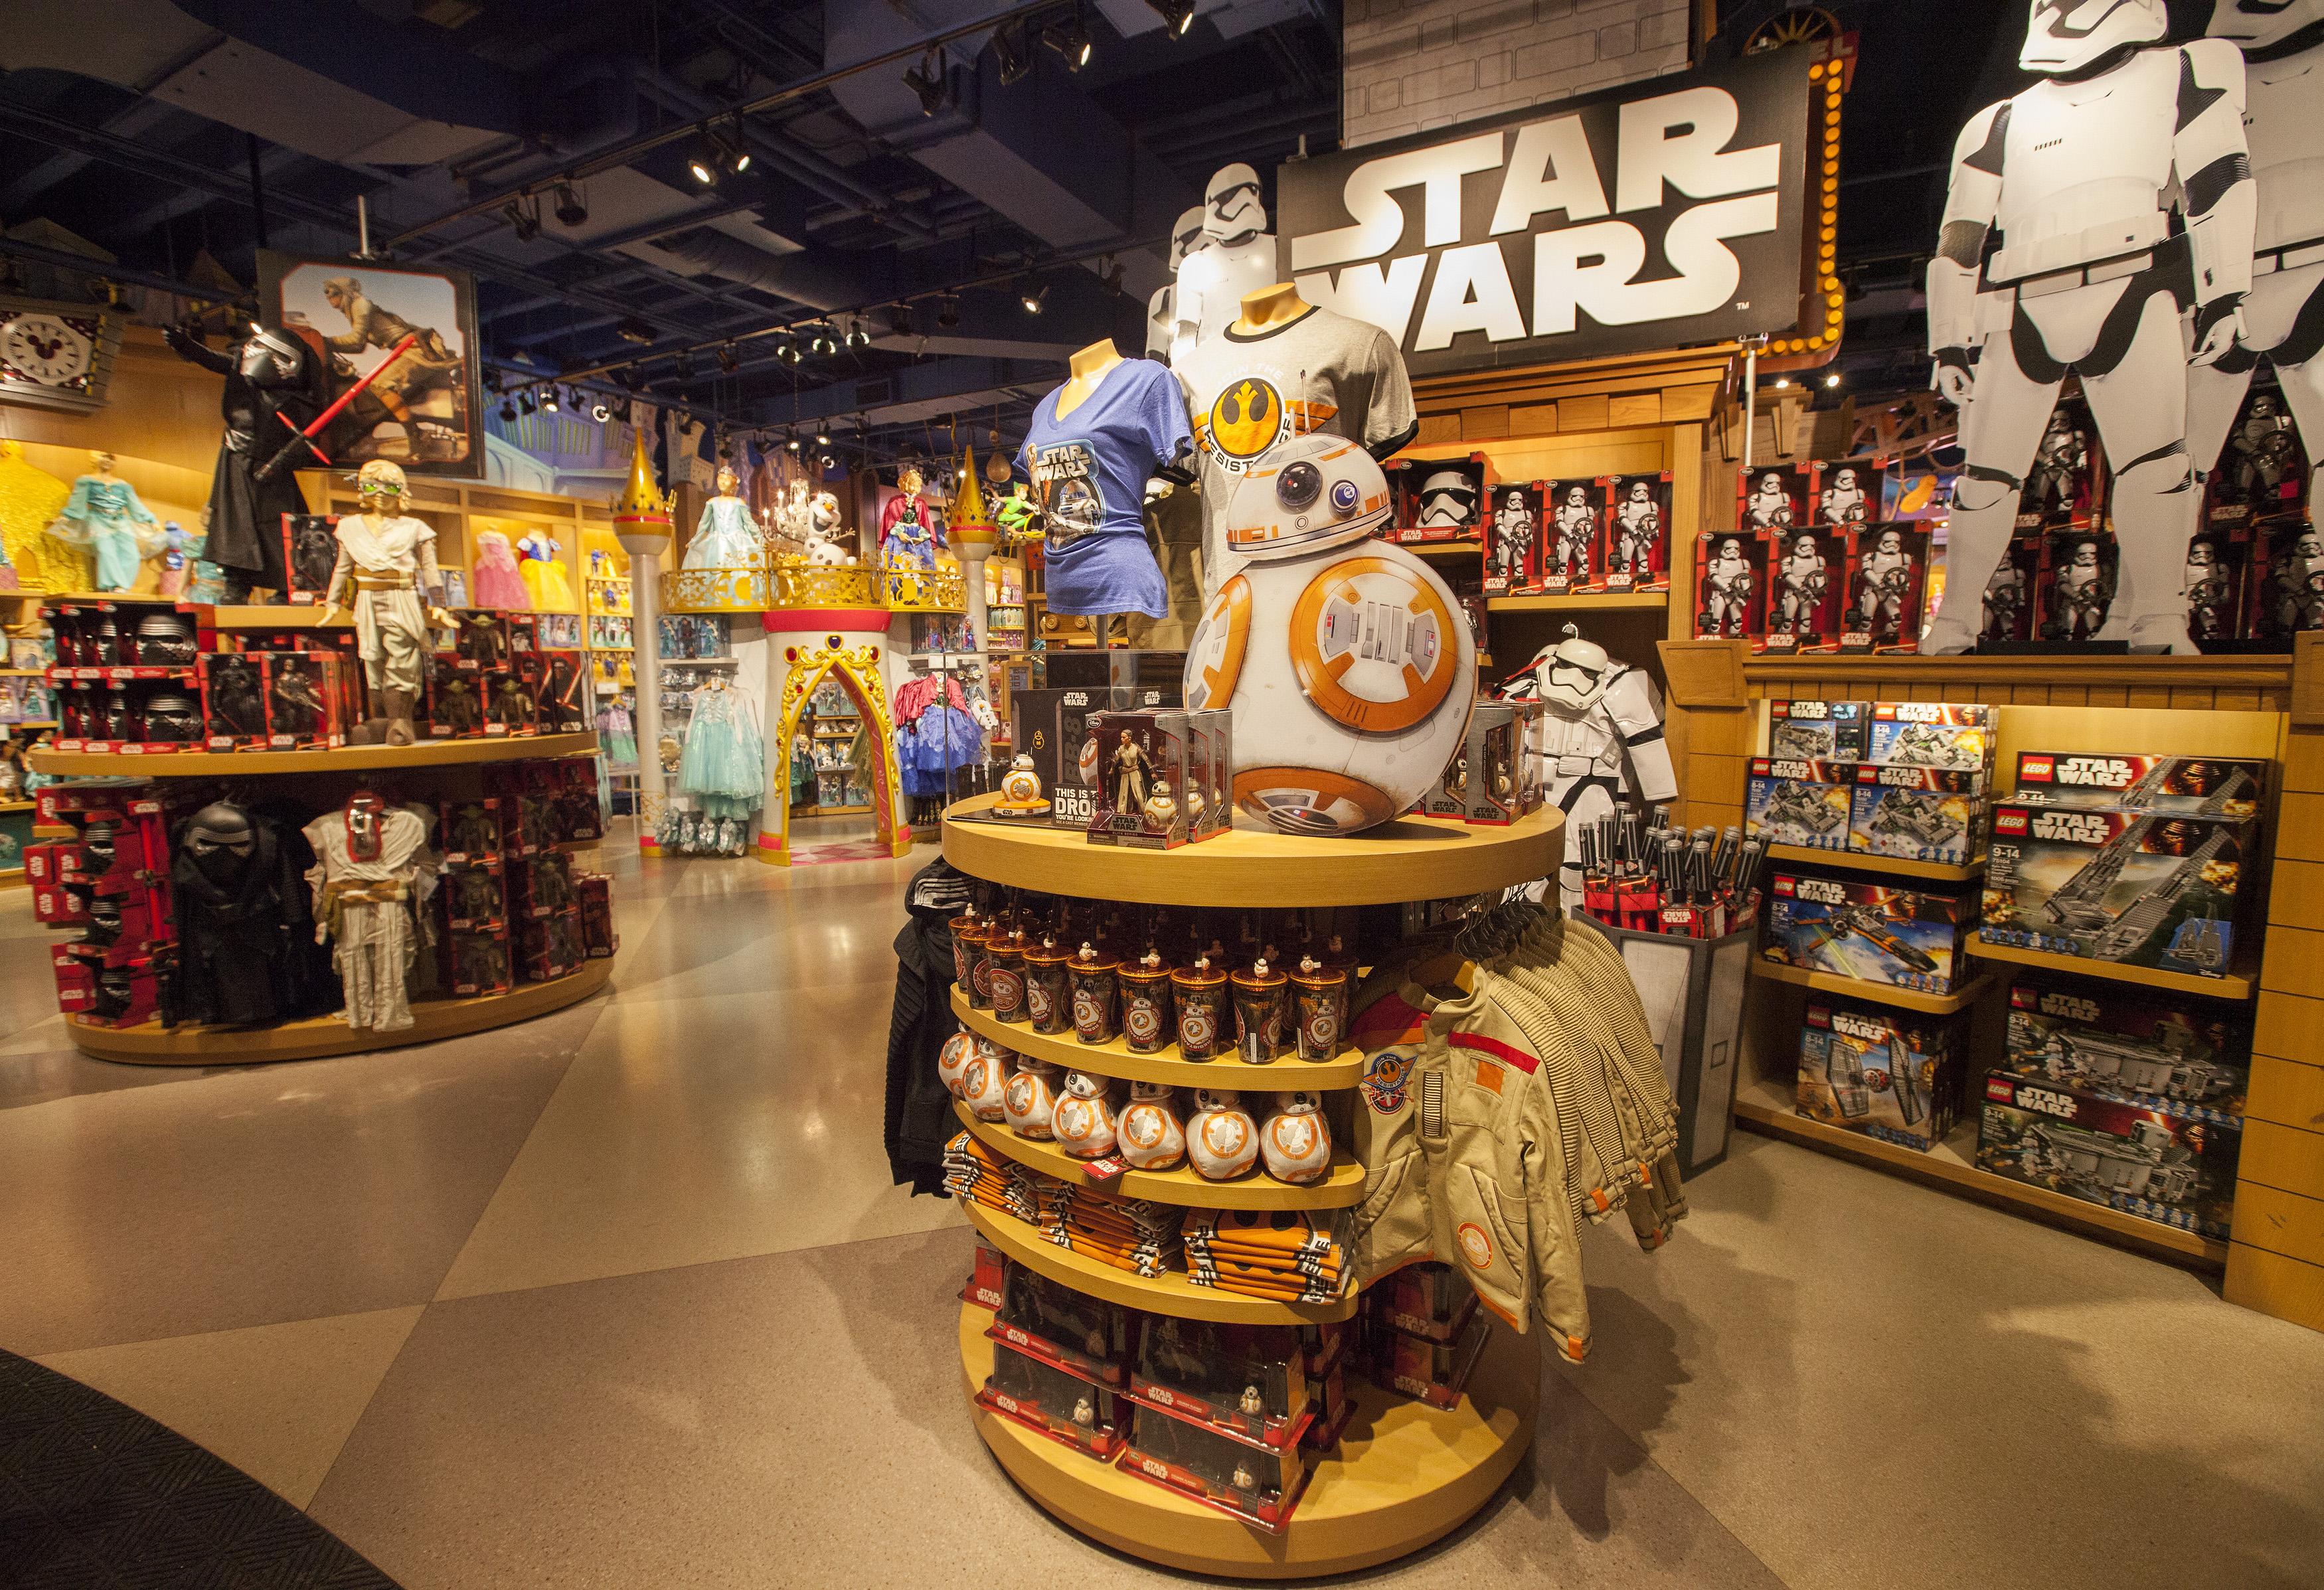 Photo by Barry Brecheisen/Invision for Disney Consumer Products/AP Images